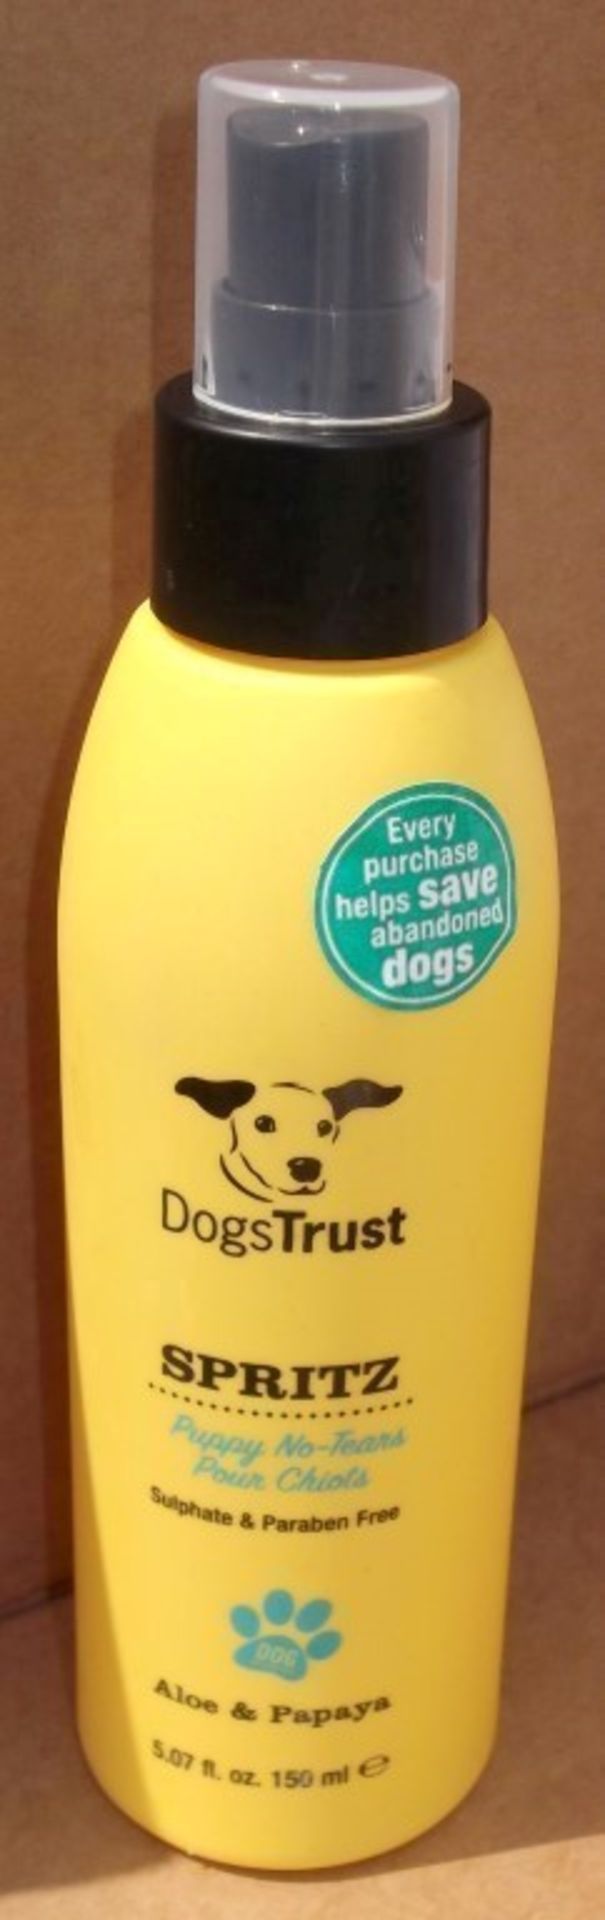 60 x Various Dogs Trust Shampoos and Conditioners - Brand New Stock - CL028 - Includes No Tears, - Image 11 of 15